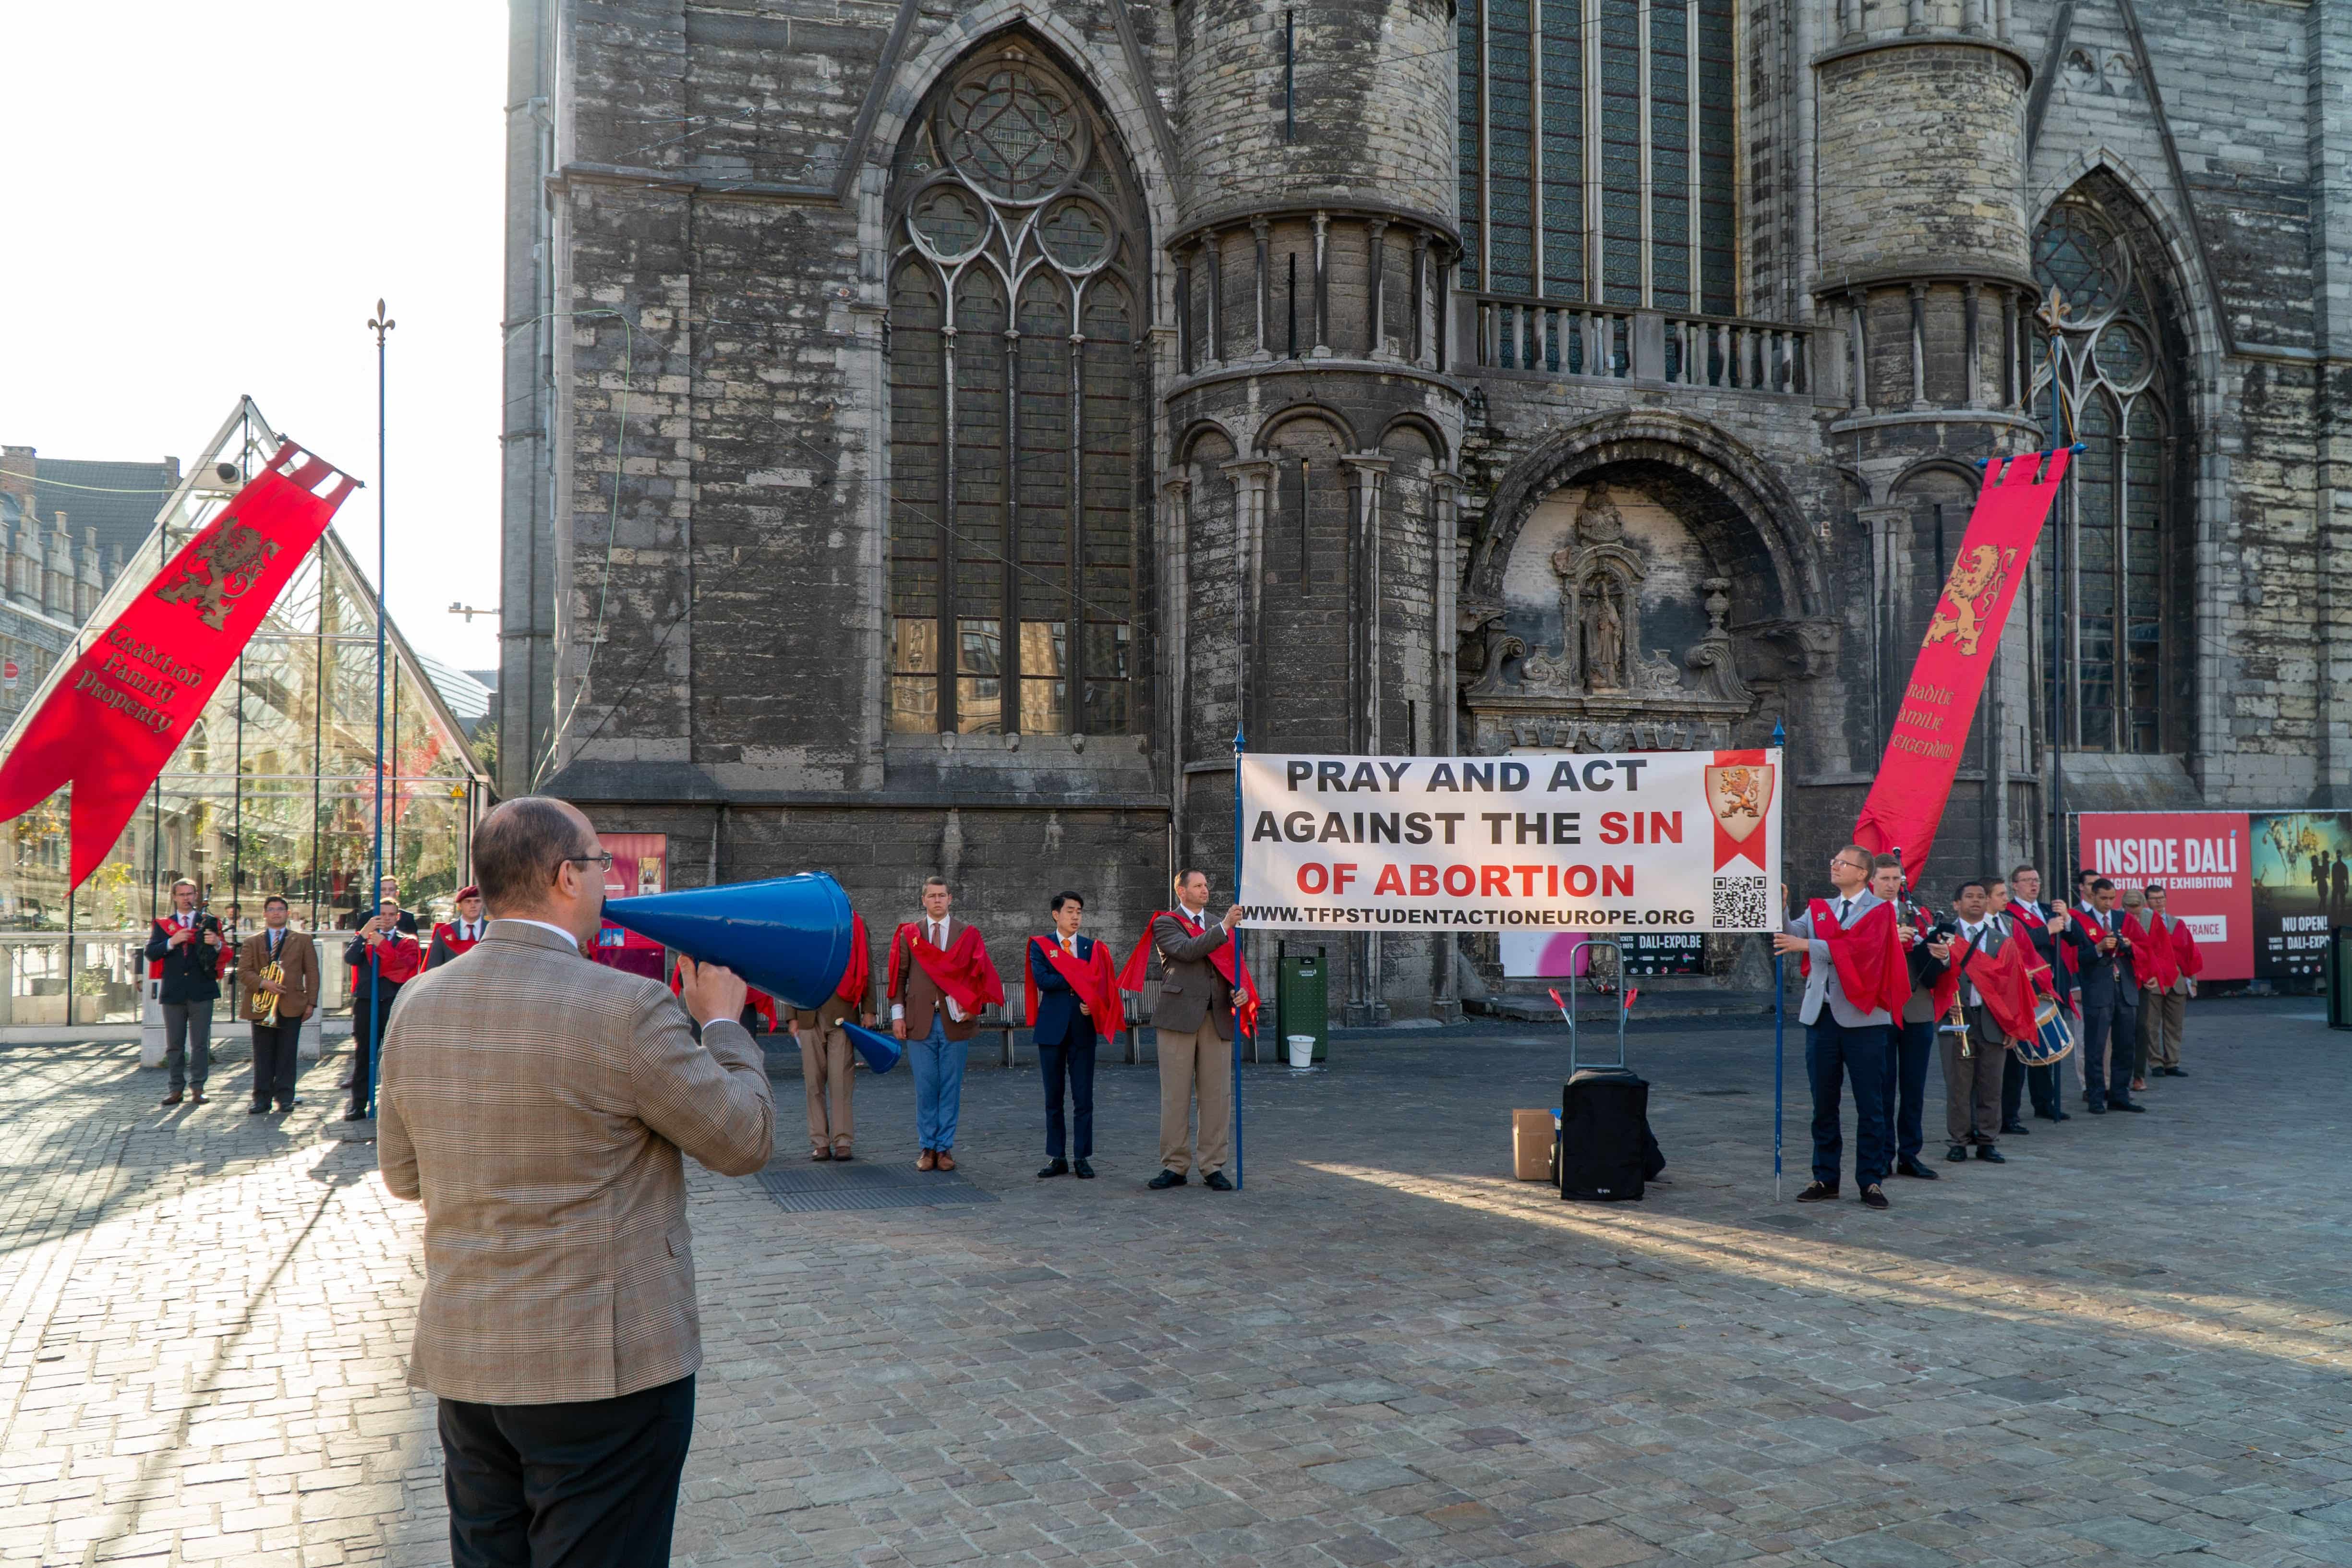 Young Men Pray and Act to End Abortion in the Netherlands and Belgium